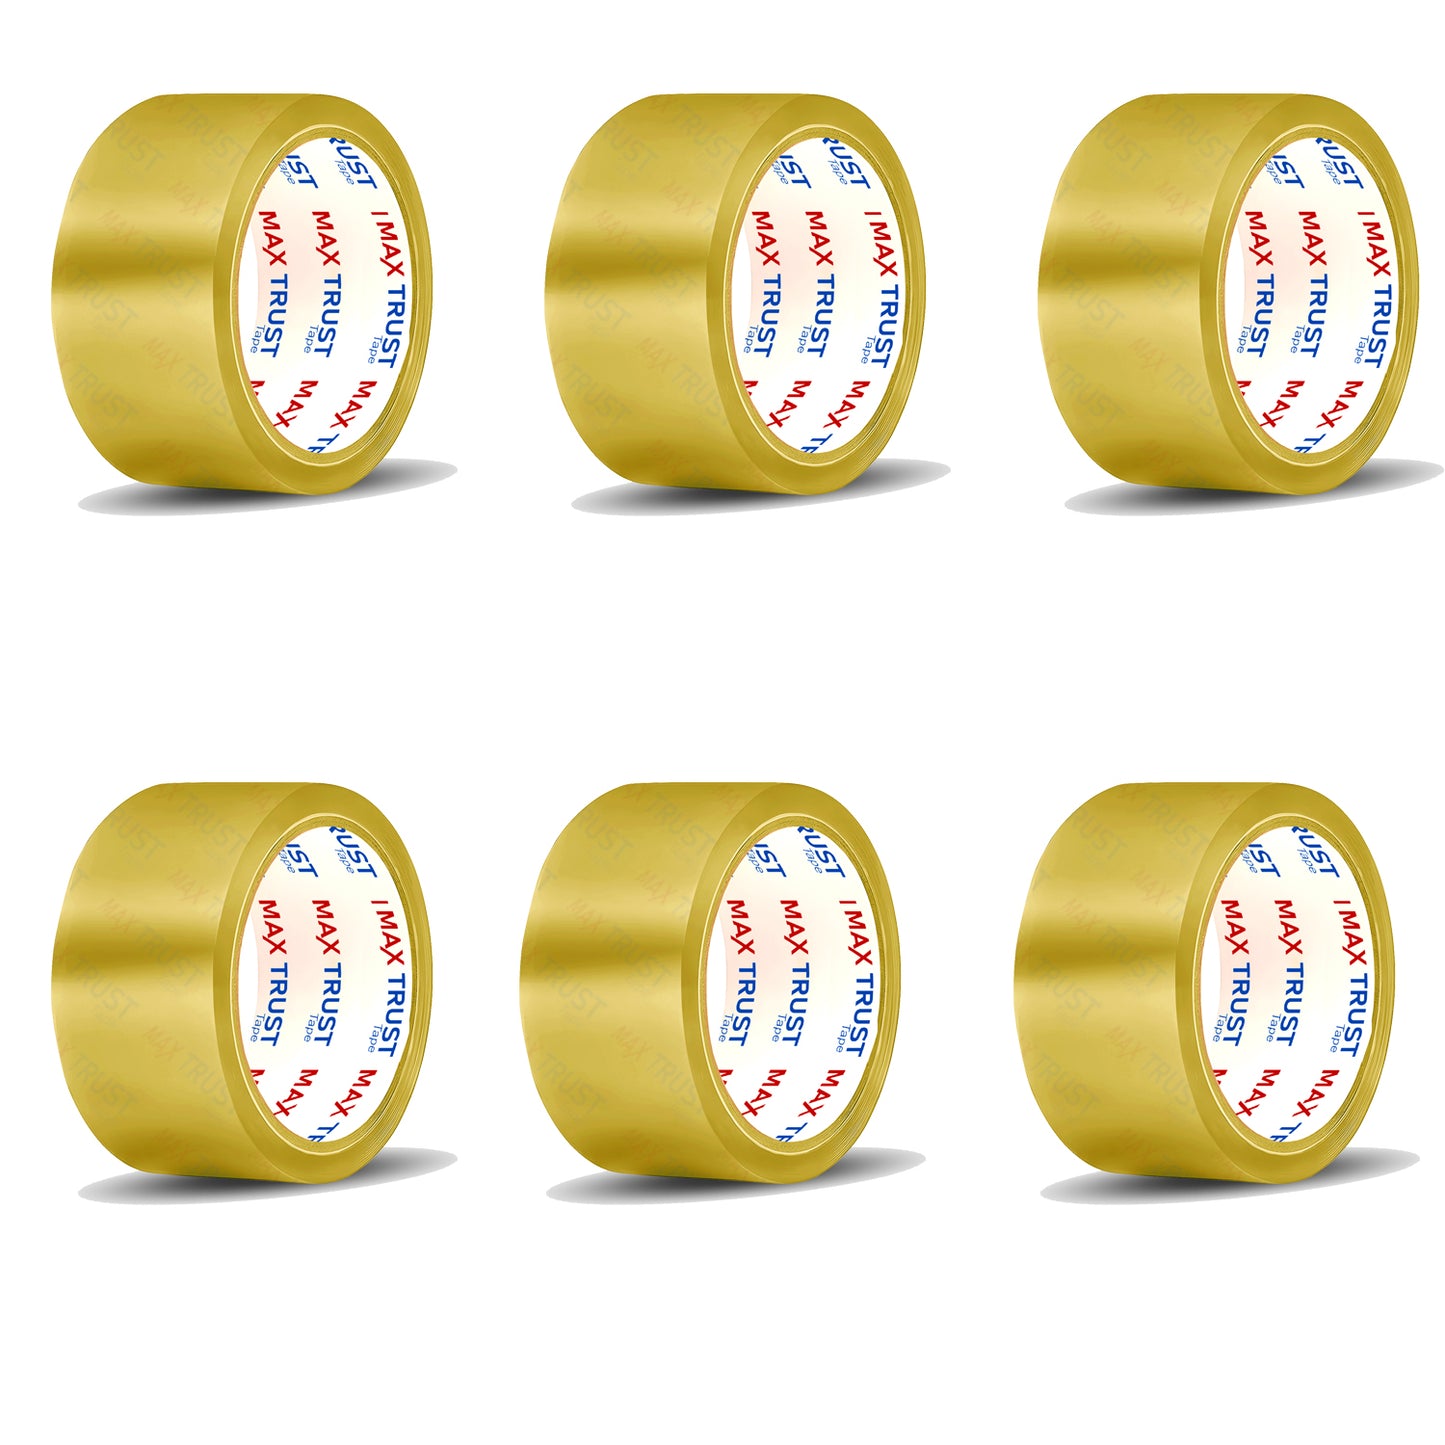 Clear Packing Tape Heavy Duty Transparent Tape Sealing Roll~3497